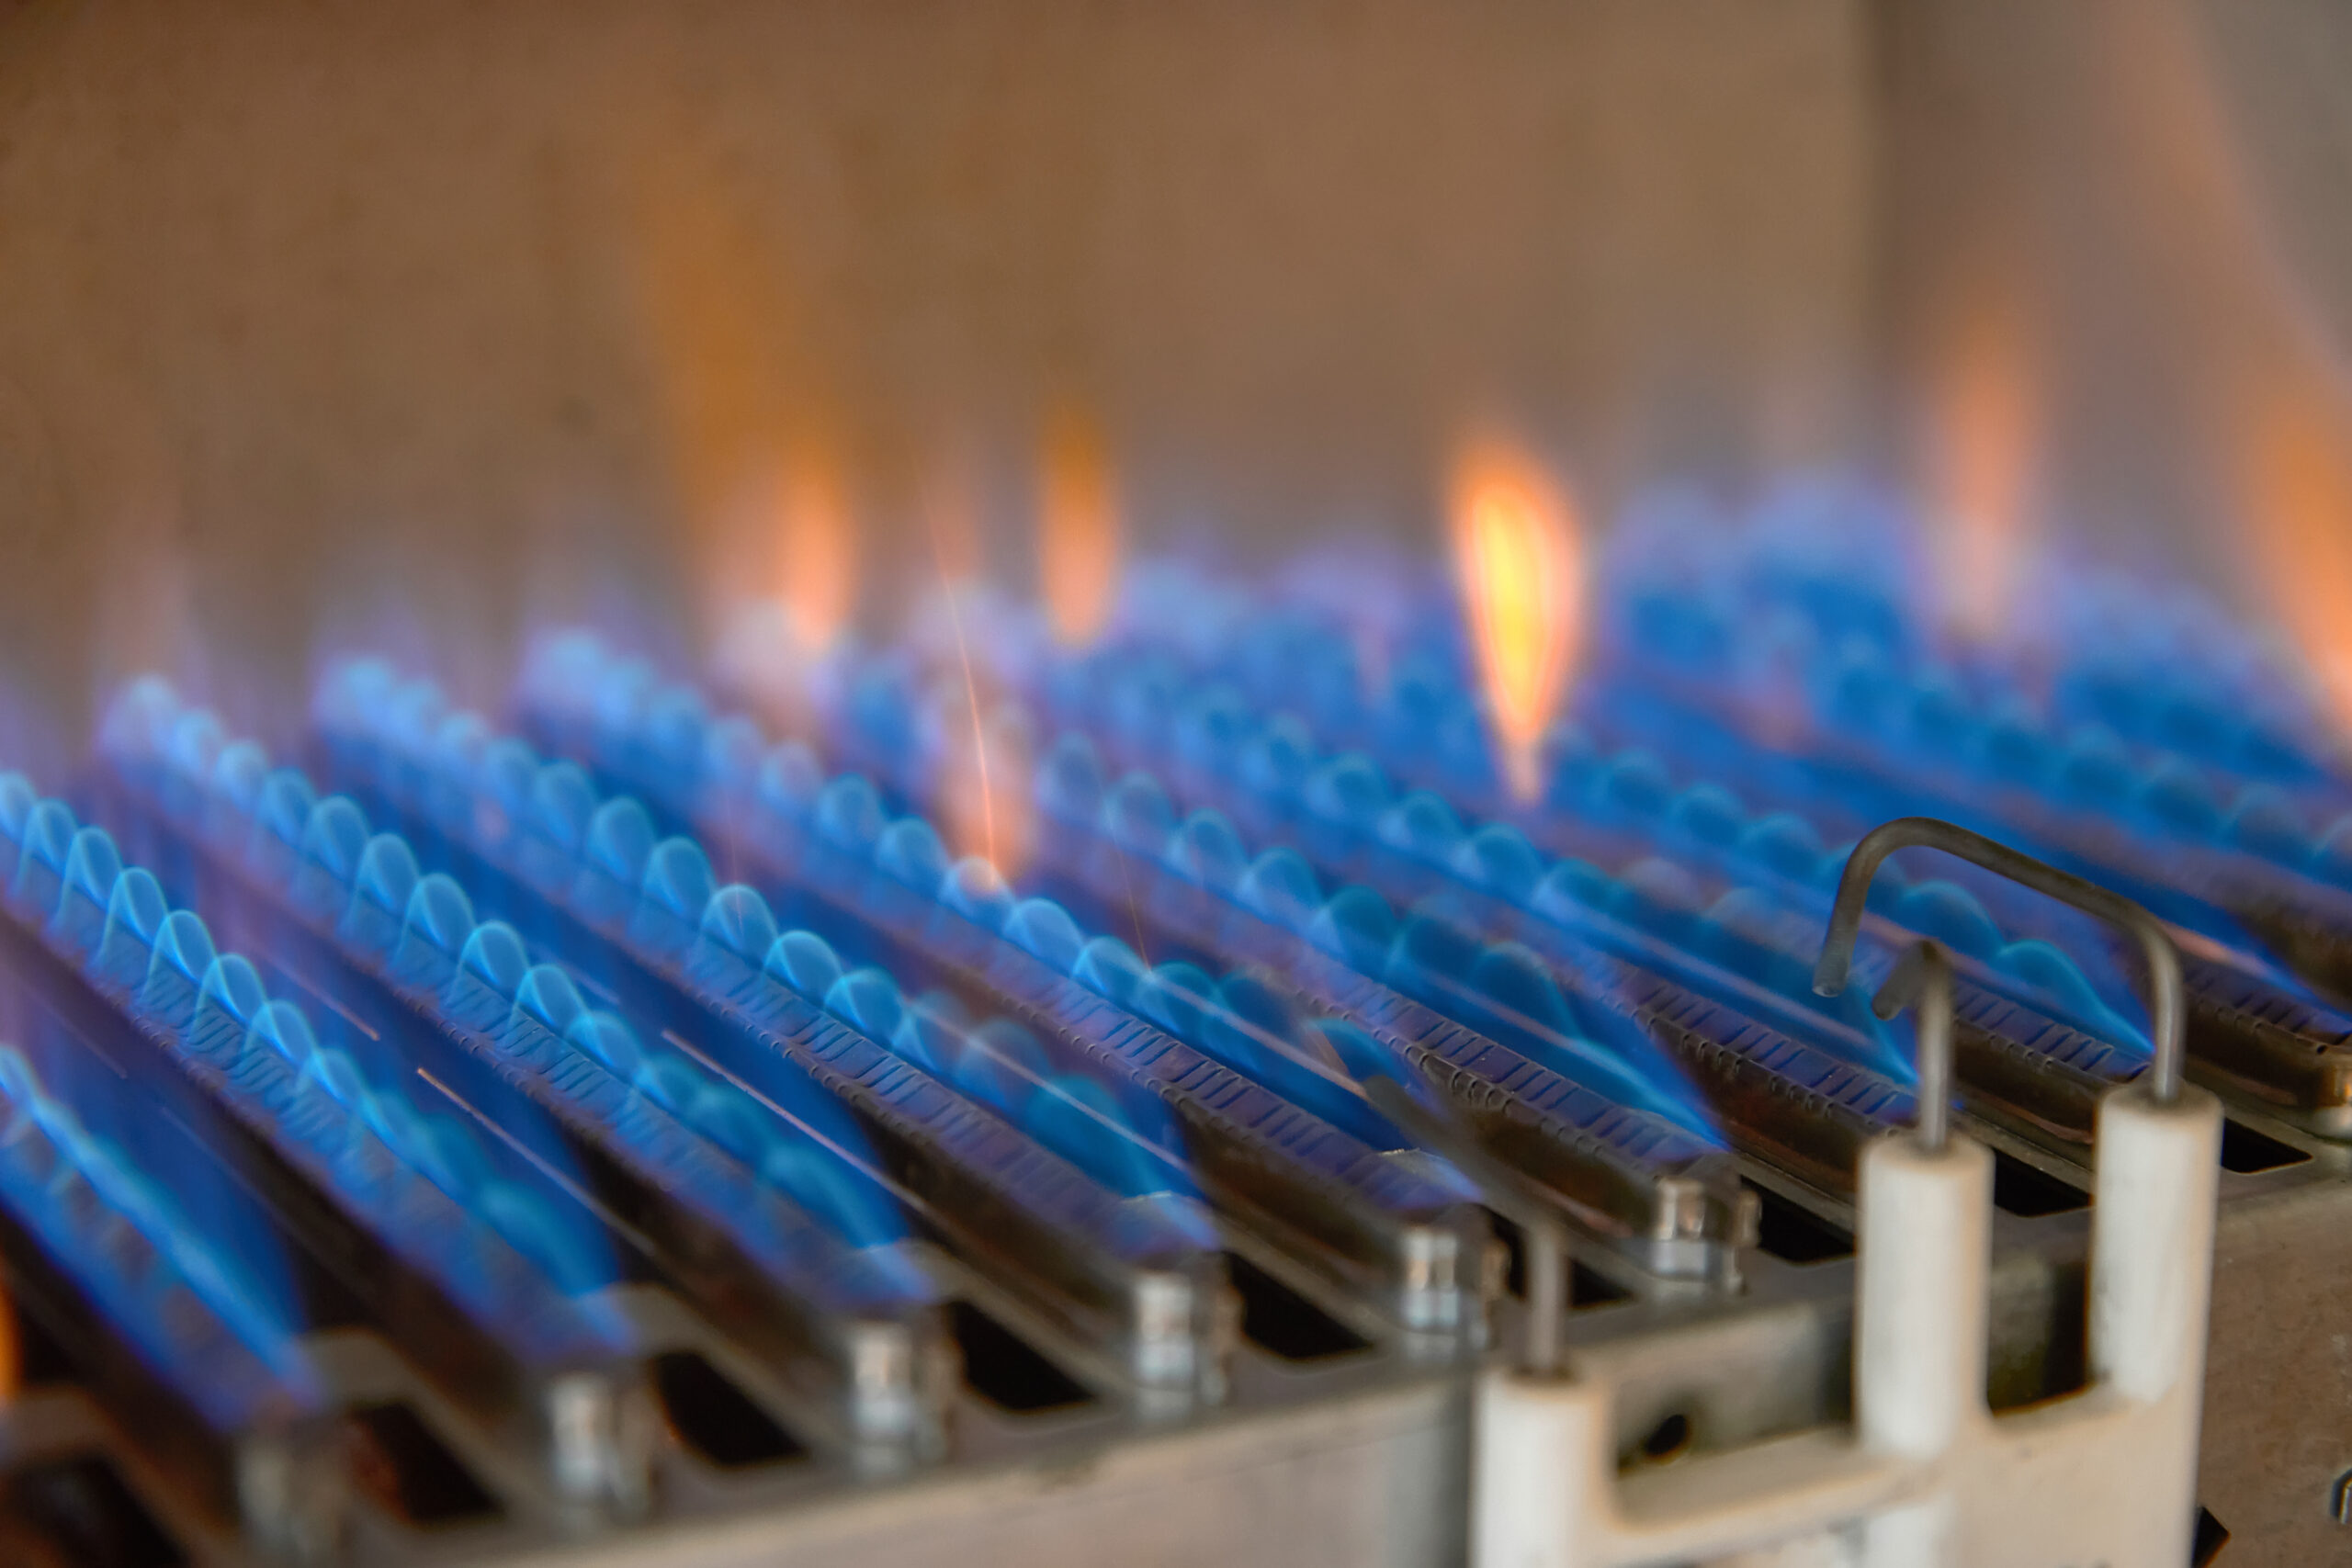 Gas burning in a heating appliance. A stainless steel burner heats a copper heat exchanger